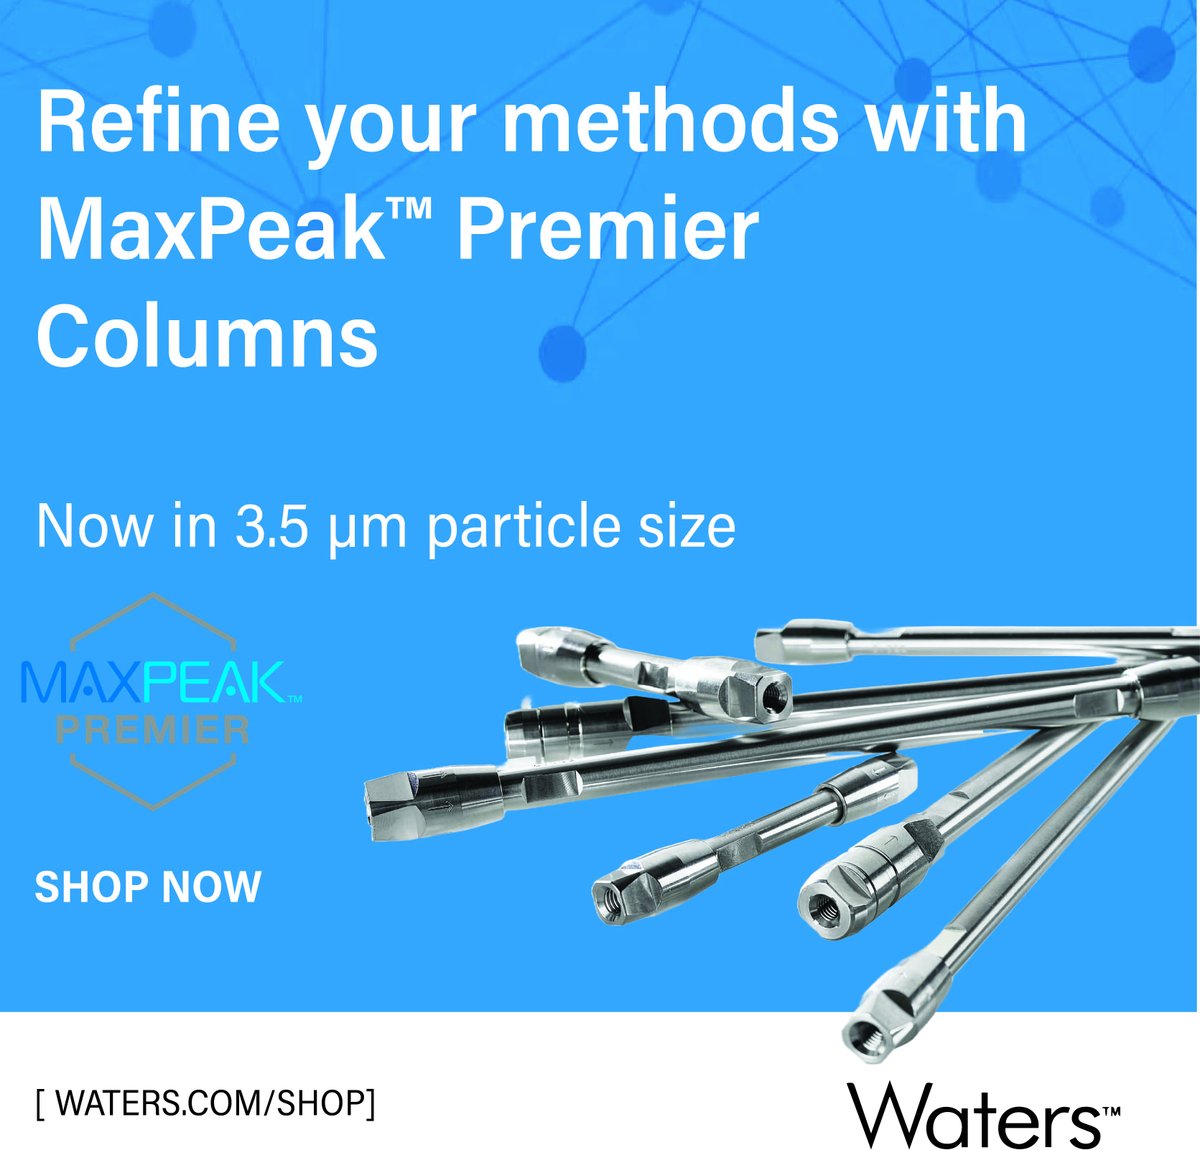 Maximize your lab's efficiency with MaxPeak Premier 3.5 µm Columns. Speed up method transfer and development across all LC platforms. Available in BEH C18, BEH C8, BEH Phenyl, BEH Amide, CSH C18, and HSS T3 chemistries. Shop Now! bit.ly/49jqkM2